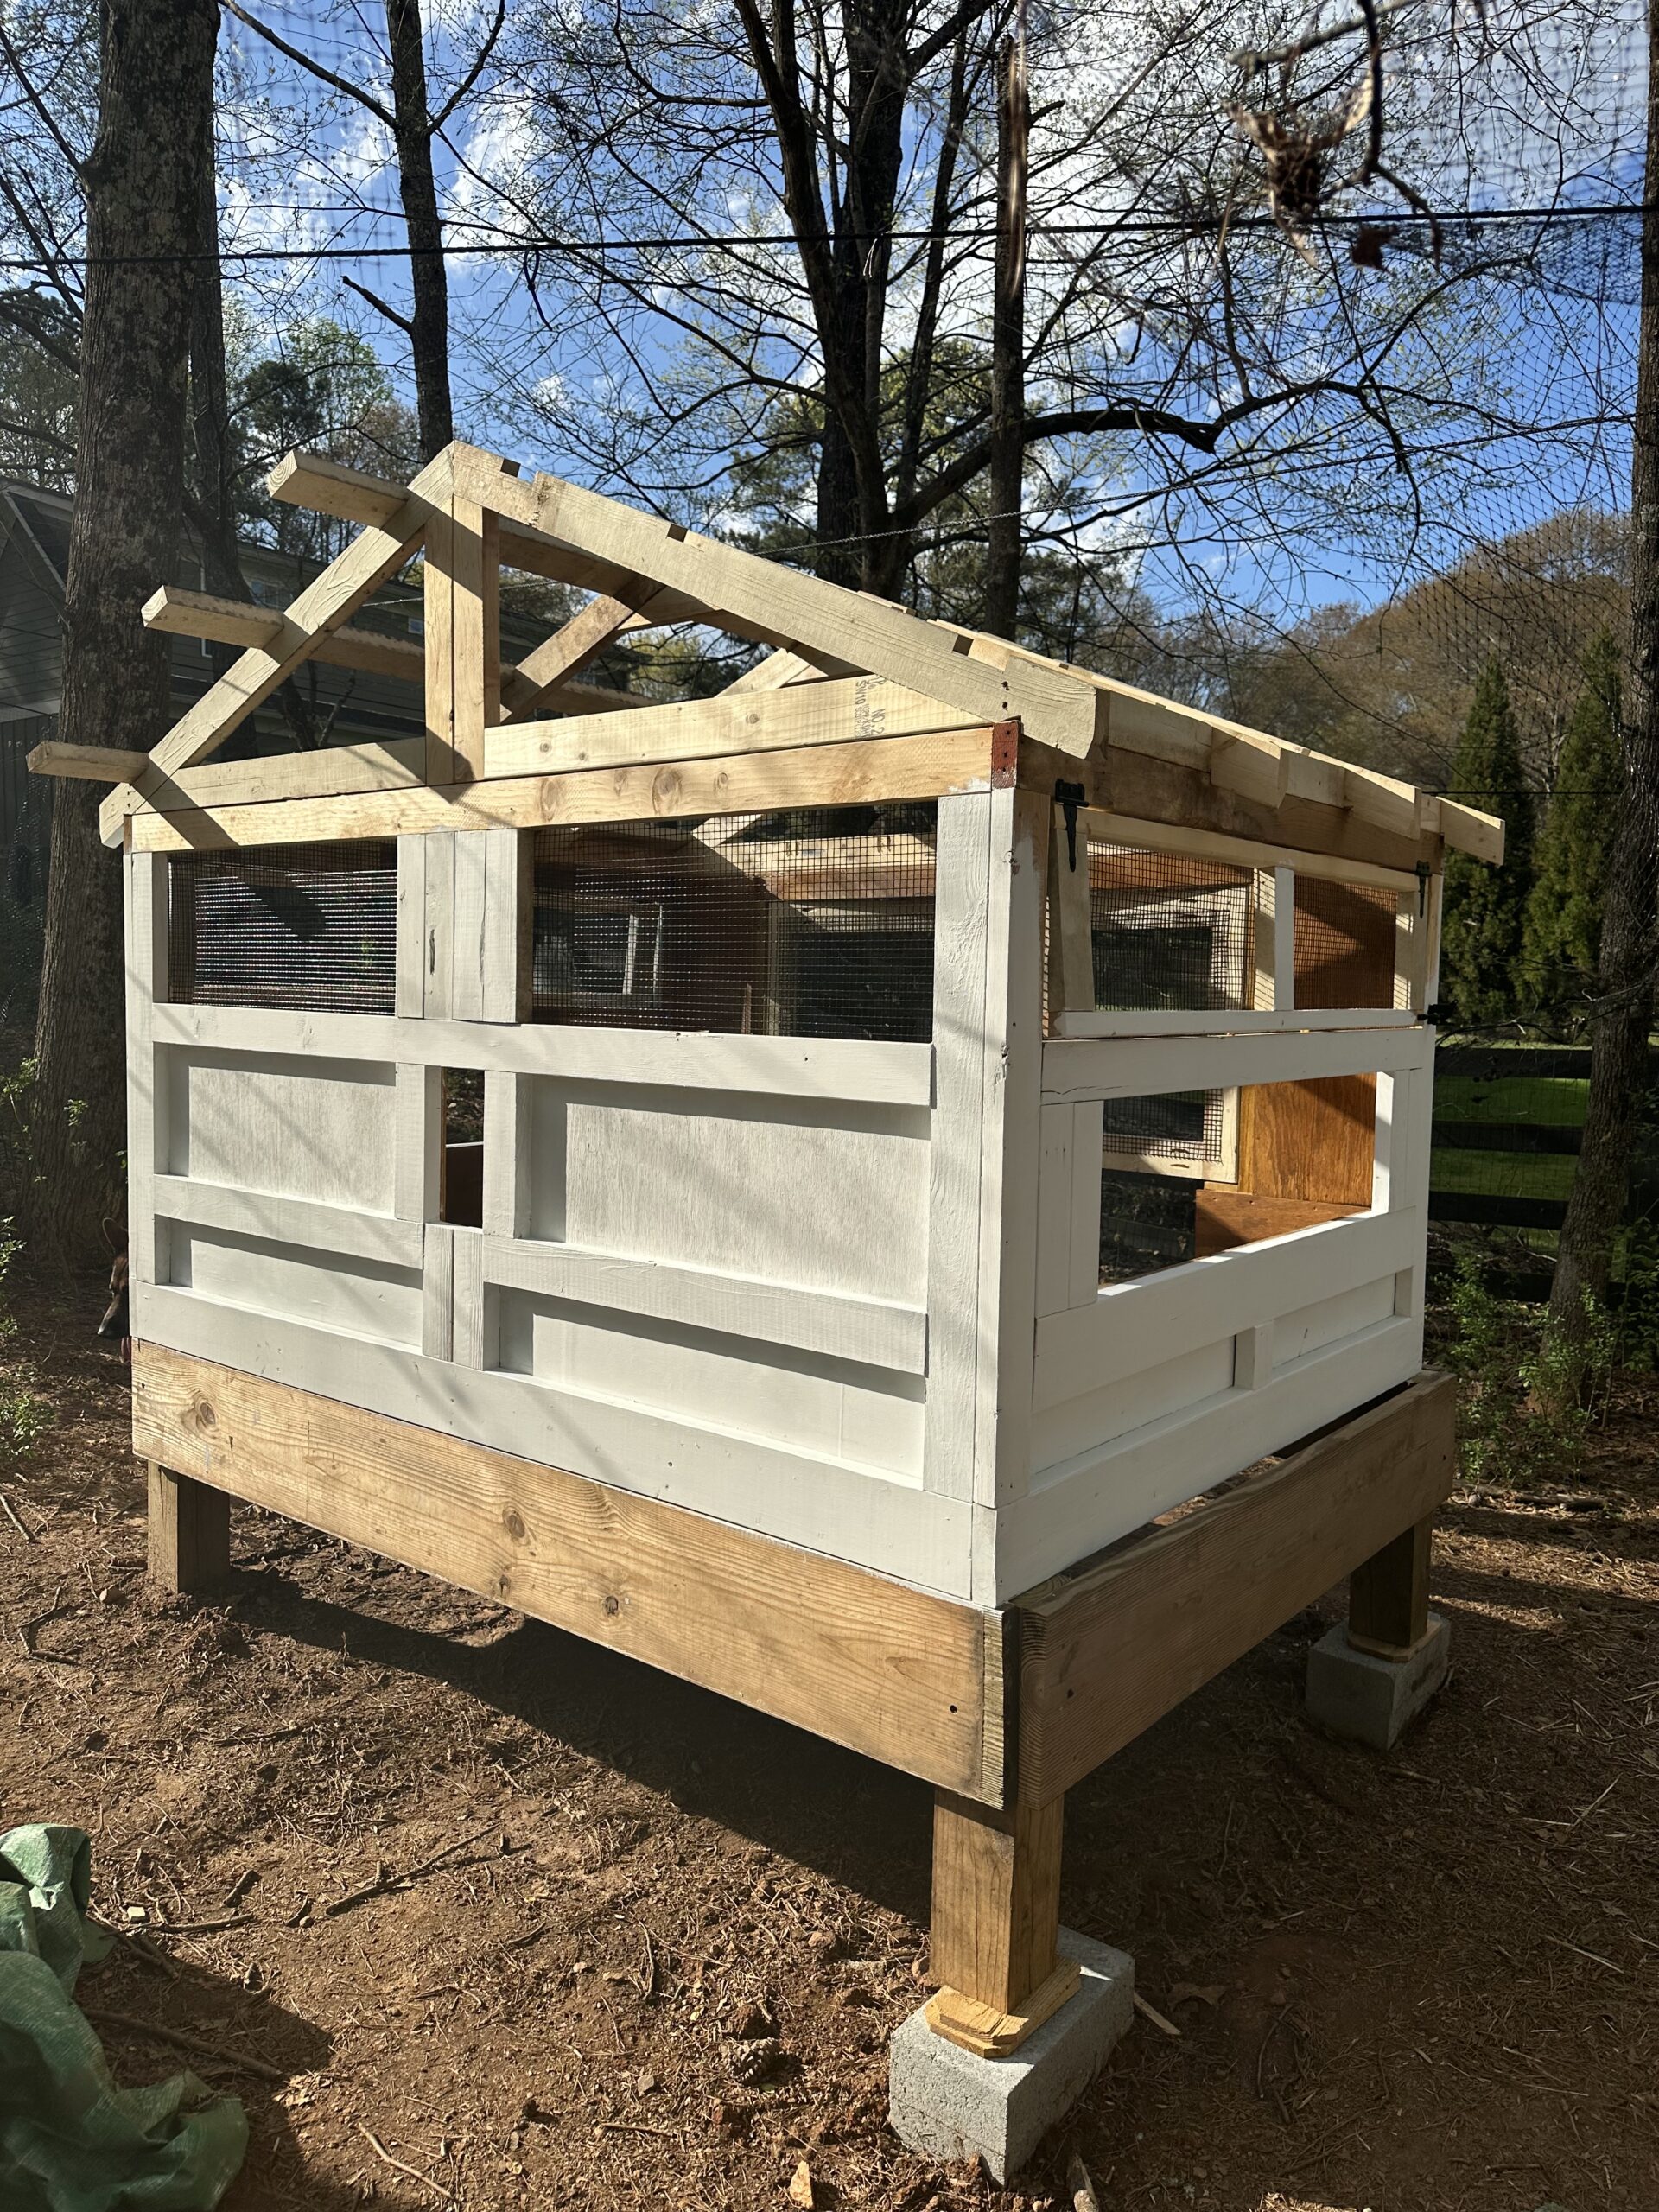 I built our second coop from scratch by copying the design of our existing coop.